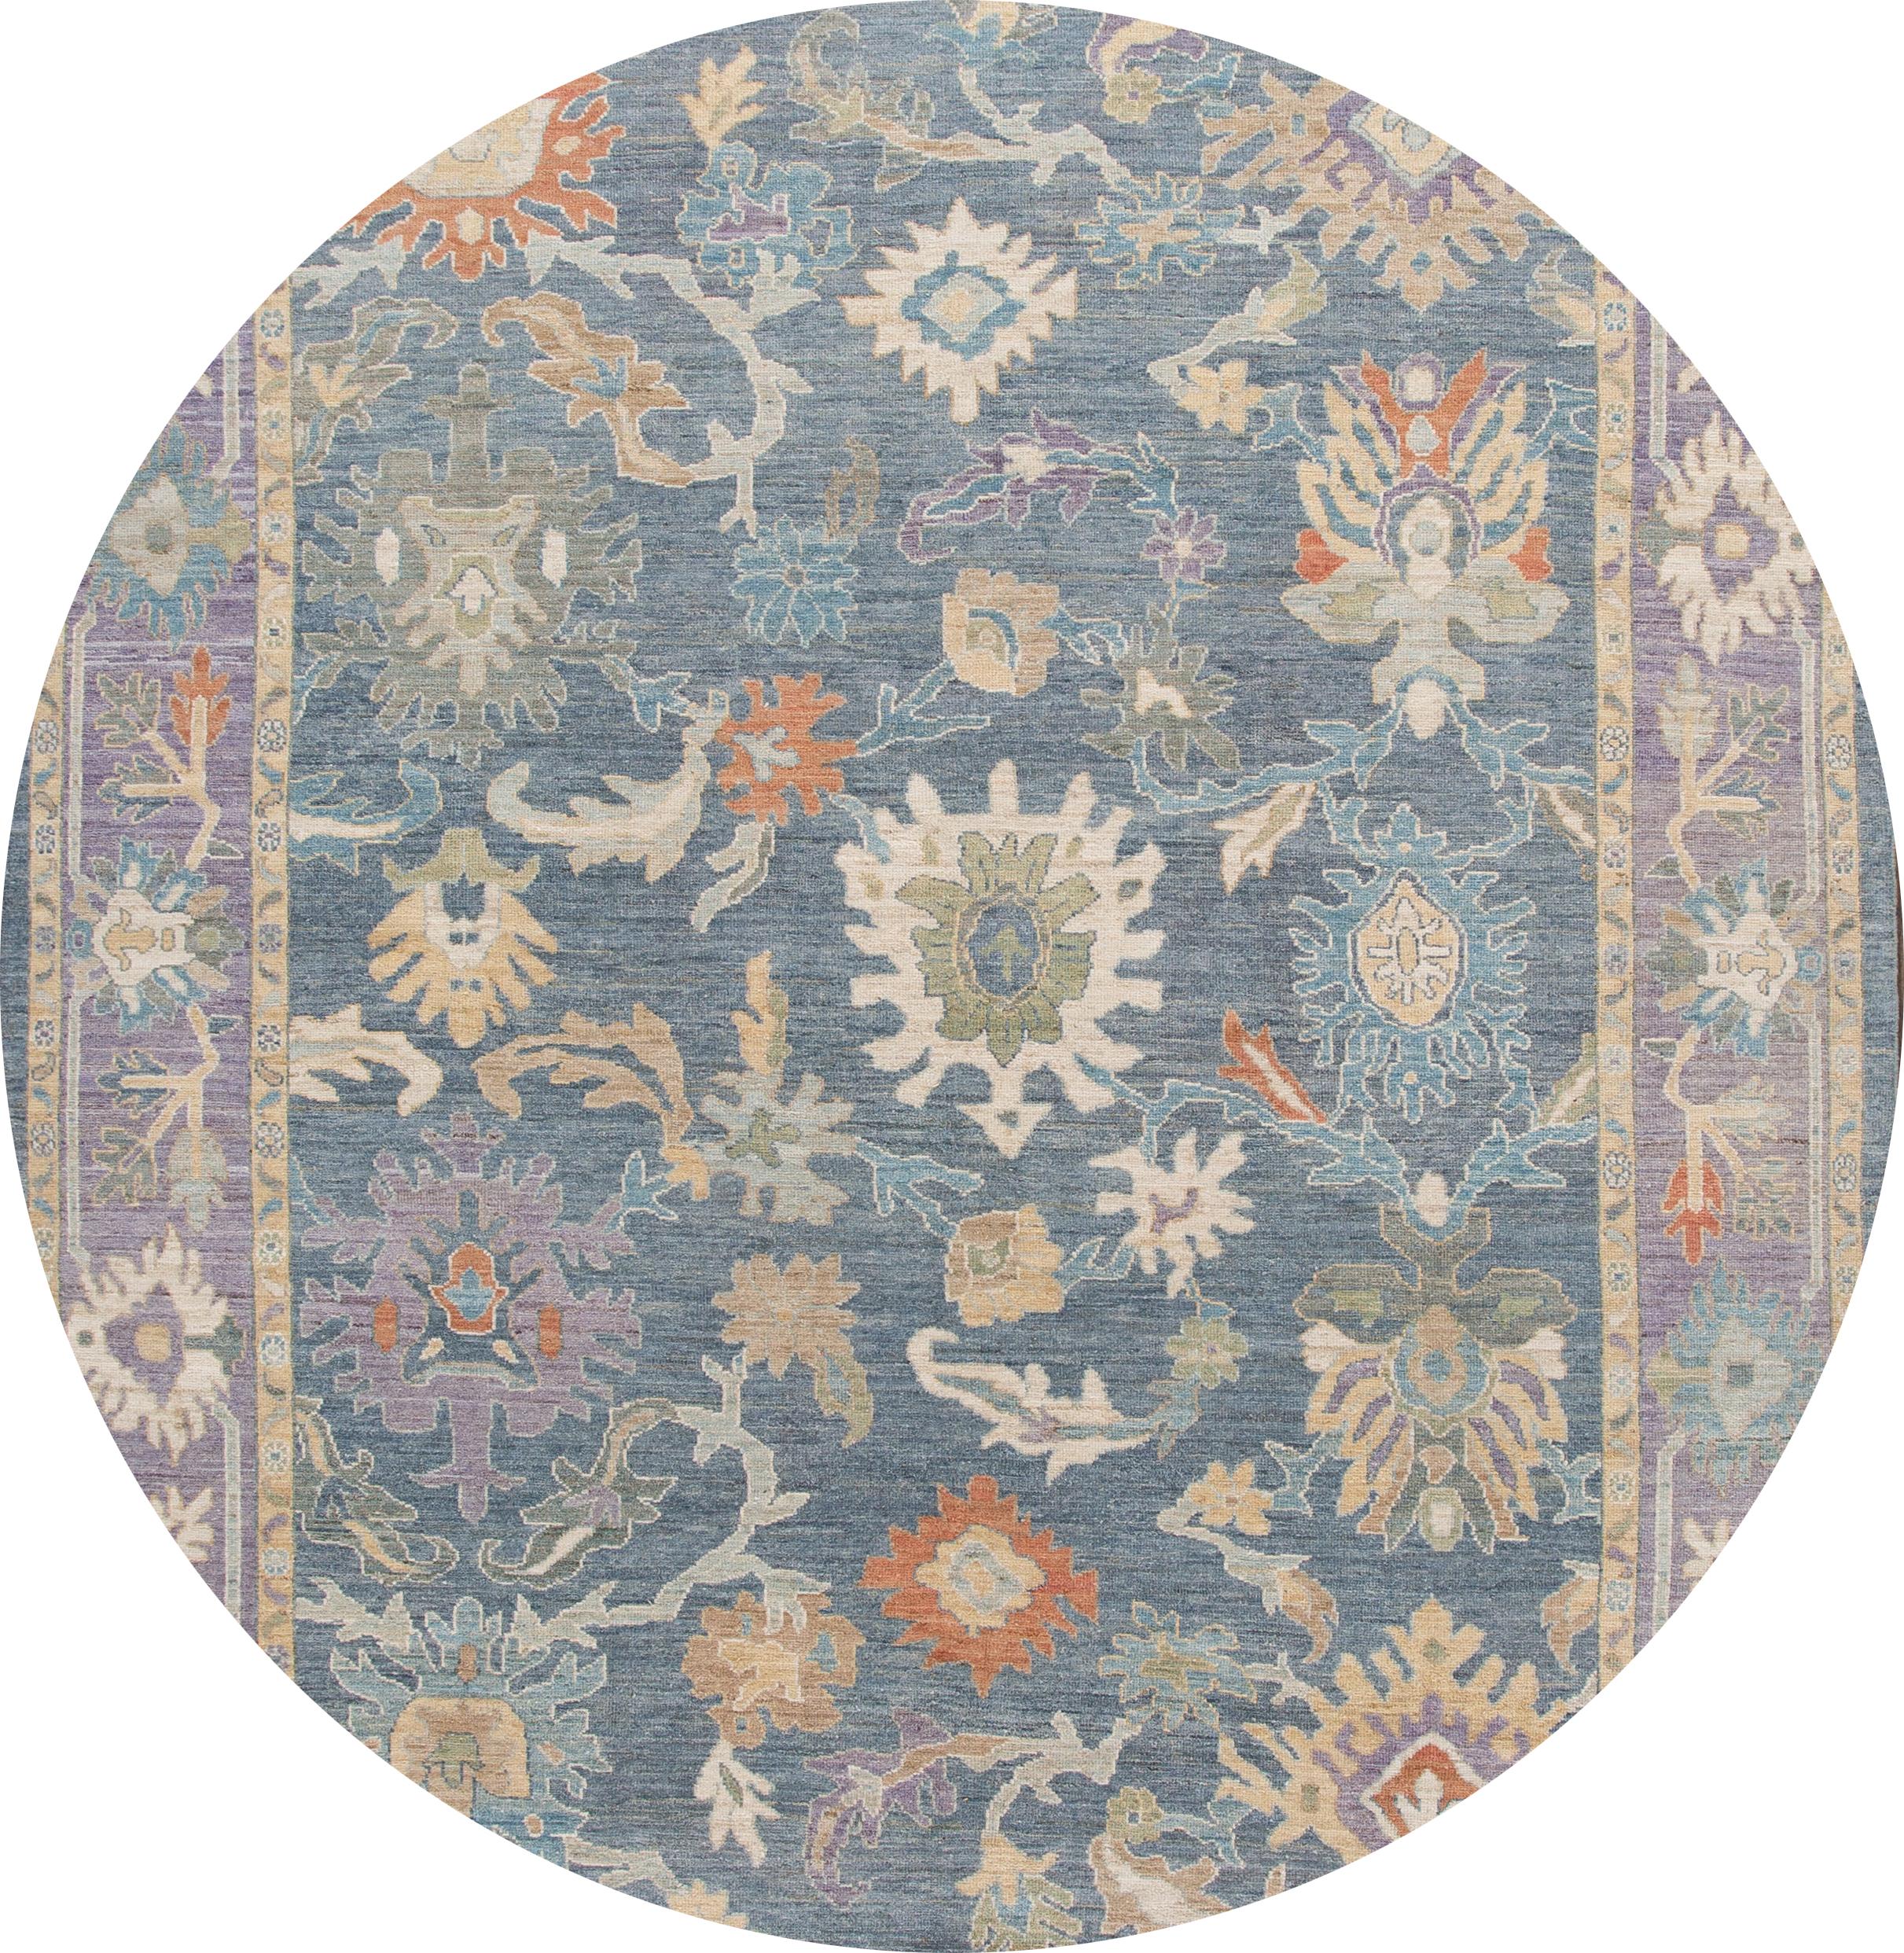 Beautiful contemporary Sultanabad rug, hand knotted wool with a blue field. This rug has a frame of purple and multi-color accents in all-over Classic floral medallion design.

This rug measures: 9'8